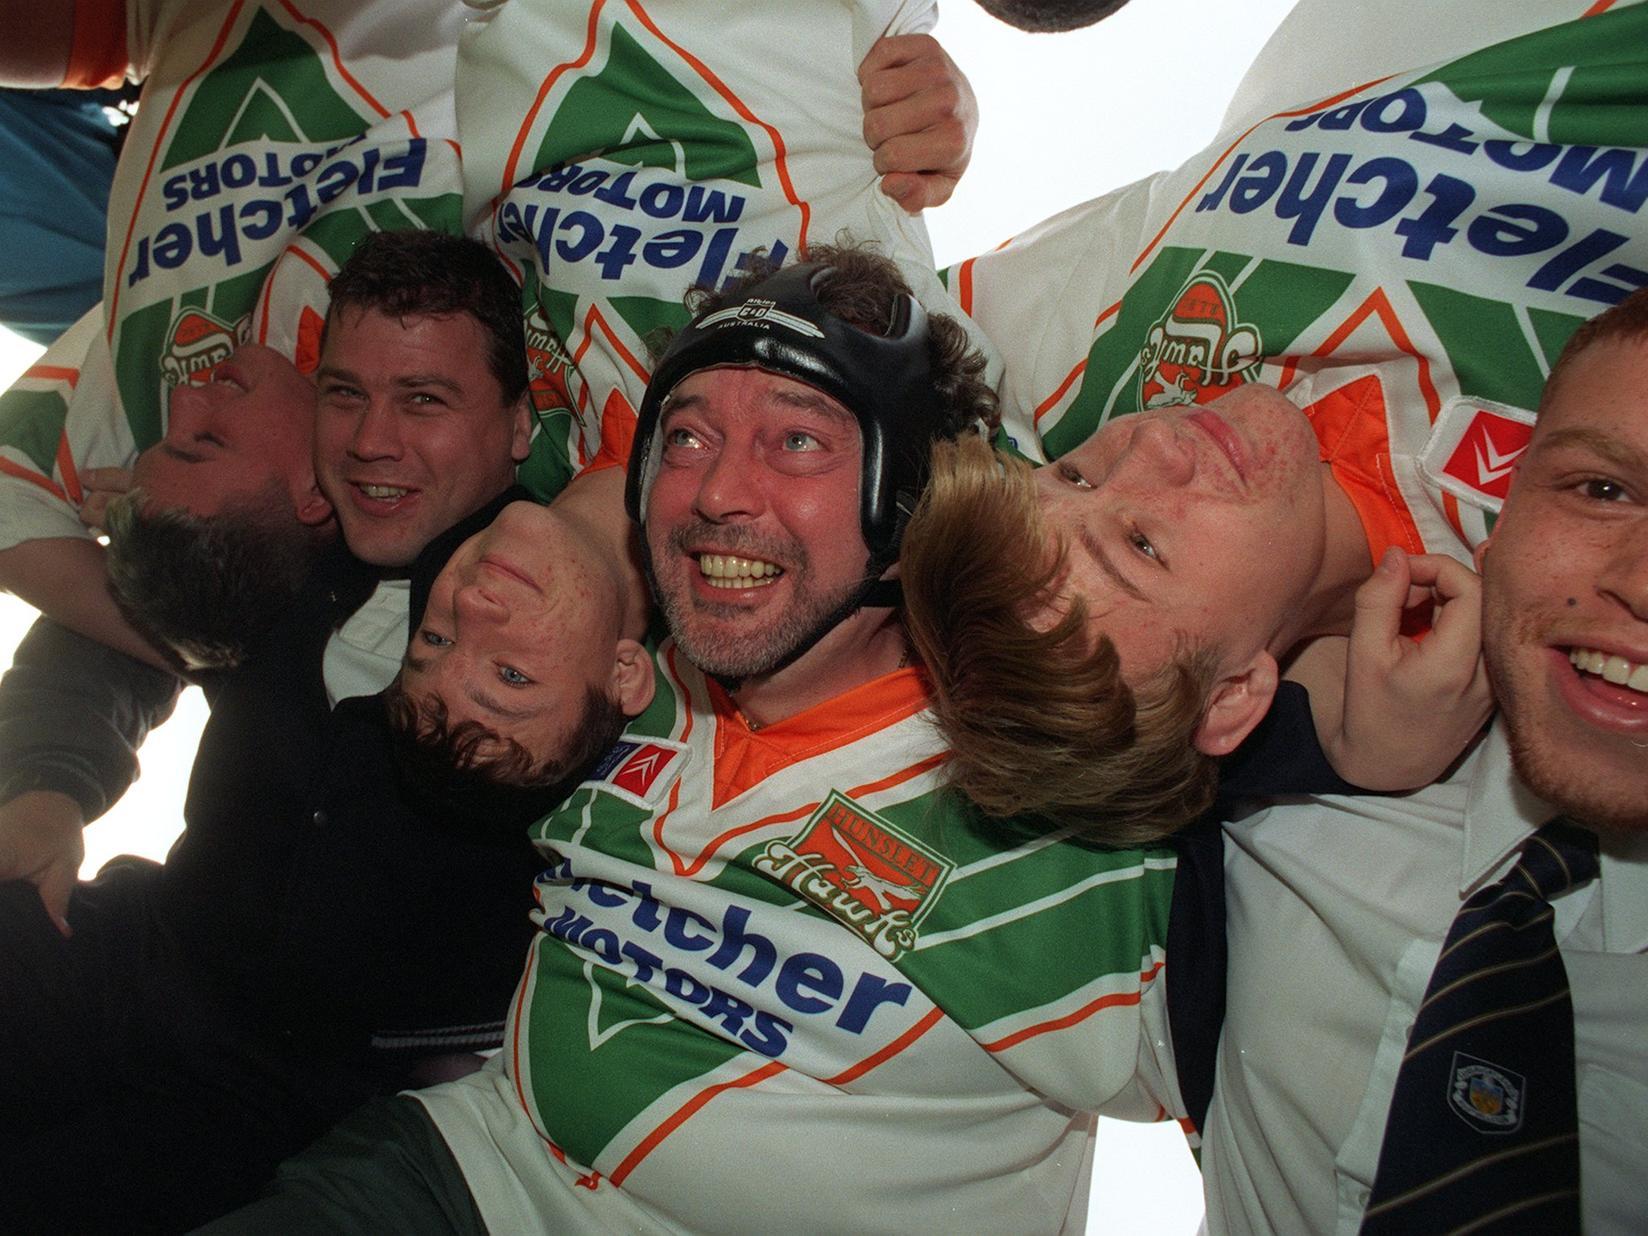 TV prankster Jeremy Beadle finds life tough in the scrum with some of the youngsters from Hunslet Parkside (all upside down), James Lowes (left) and Marvin Goulden (right). Pictured in November 1996.